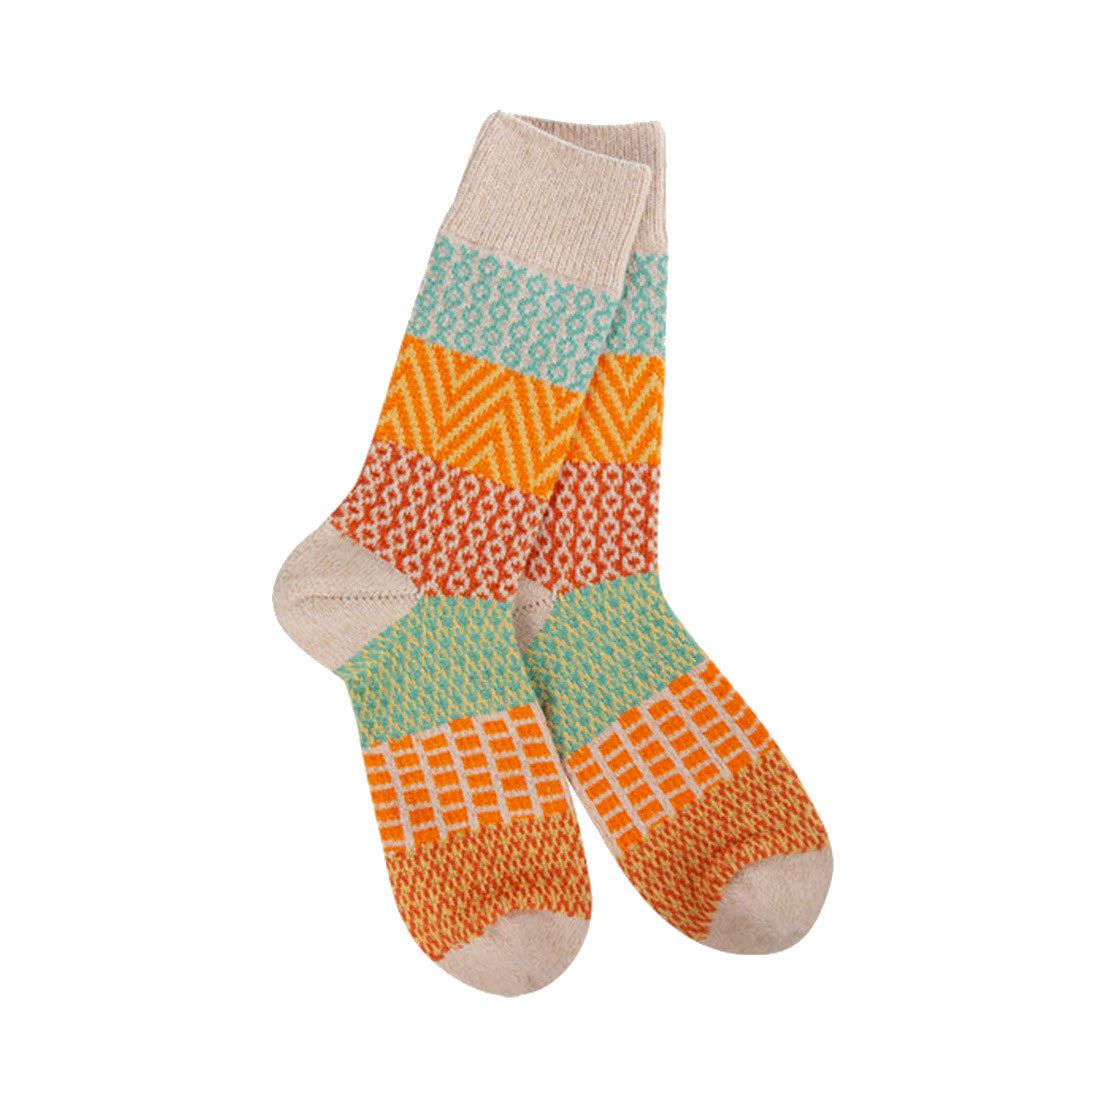 A pair of Worlds Softest Gallery Crew Socks Wheat for women with geometric designs in shades of orange, green, and white, displayed on a plain background.